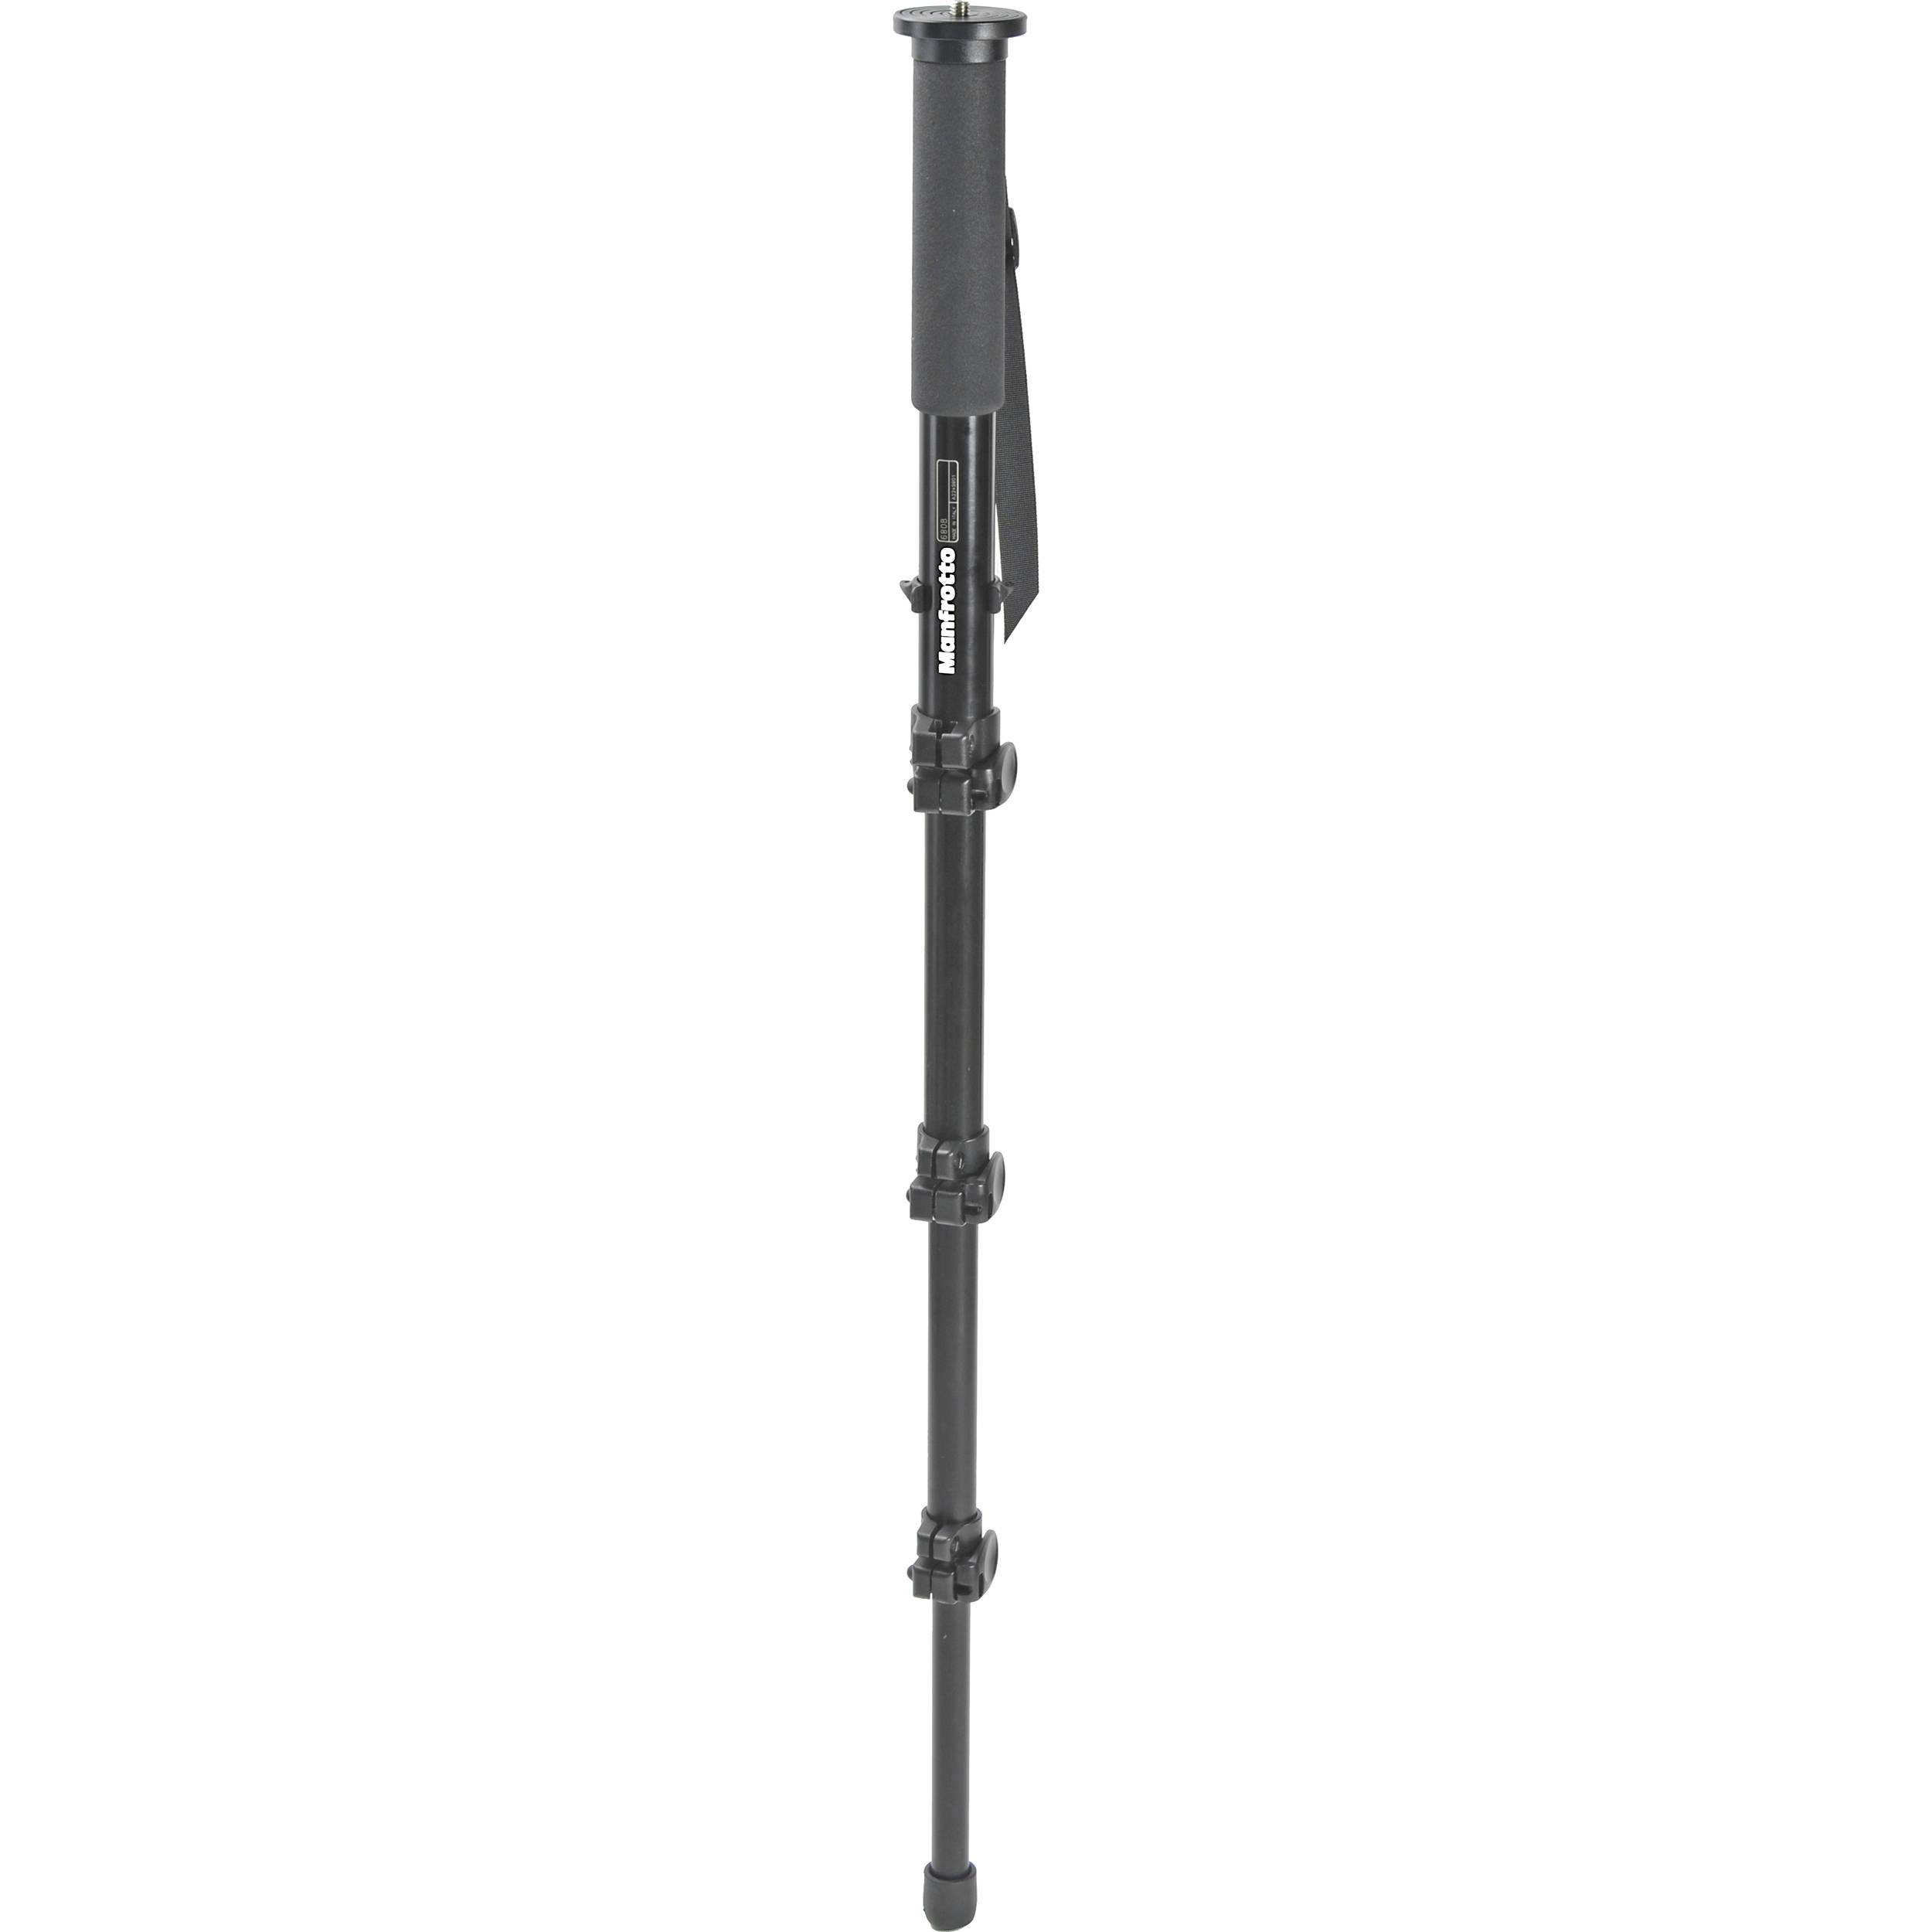 Manfrotto 680B - 4 Section Compact Monopod